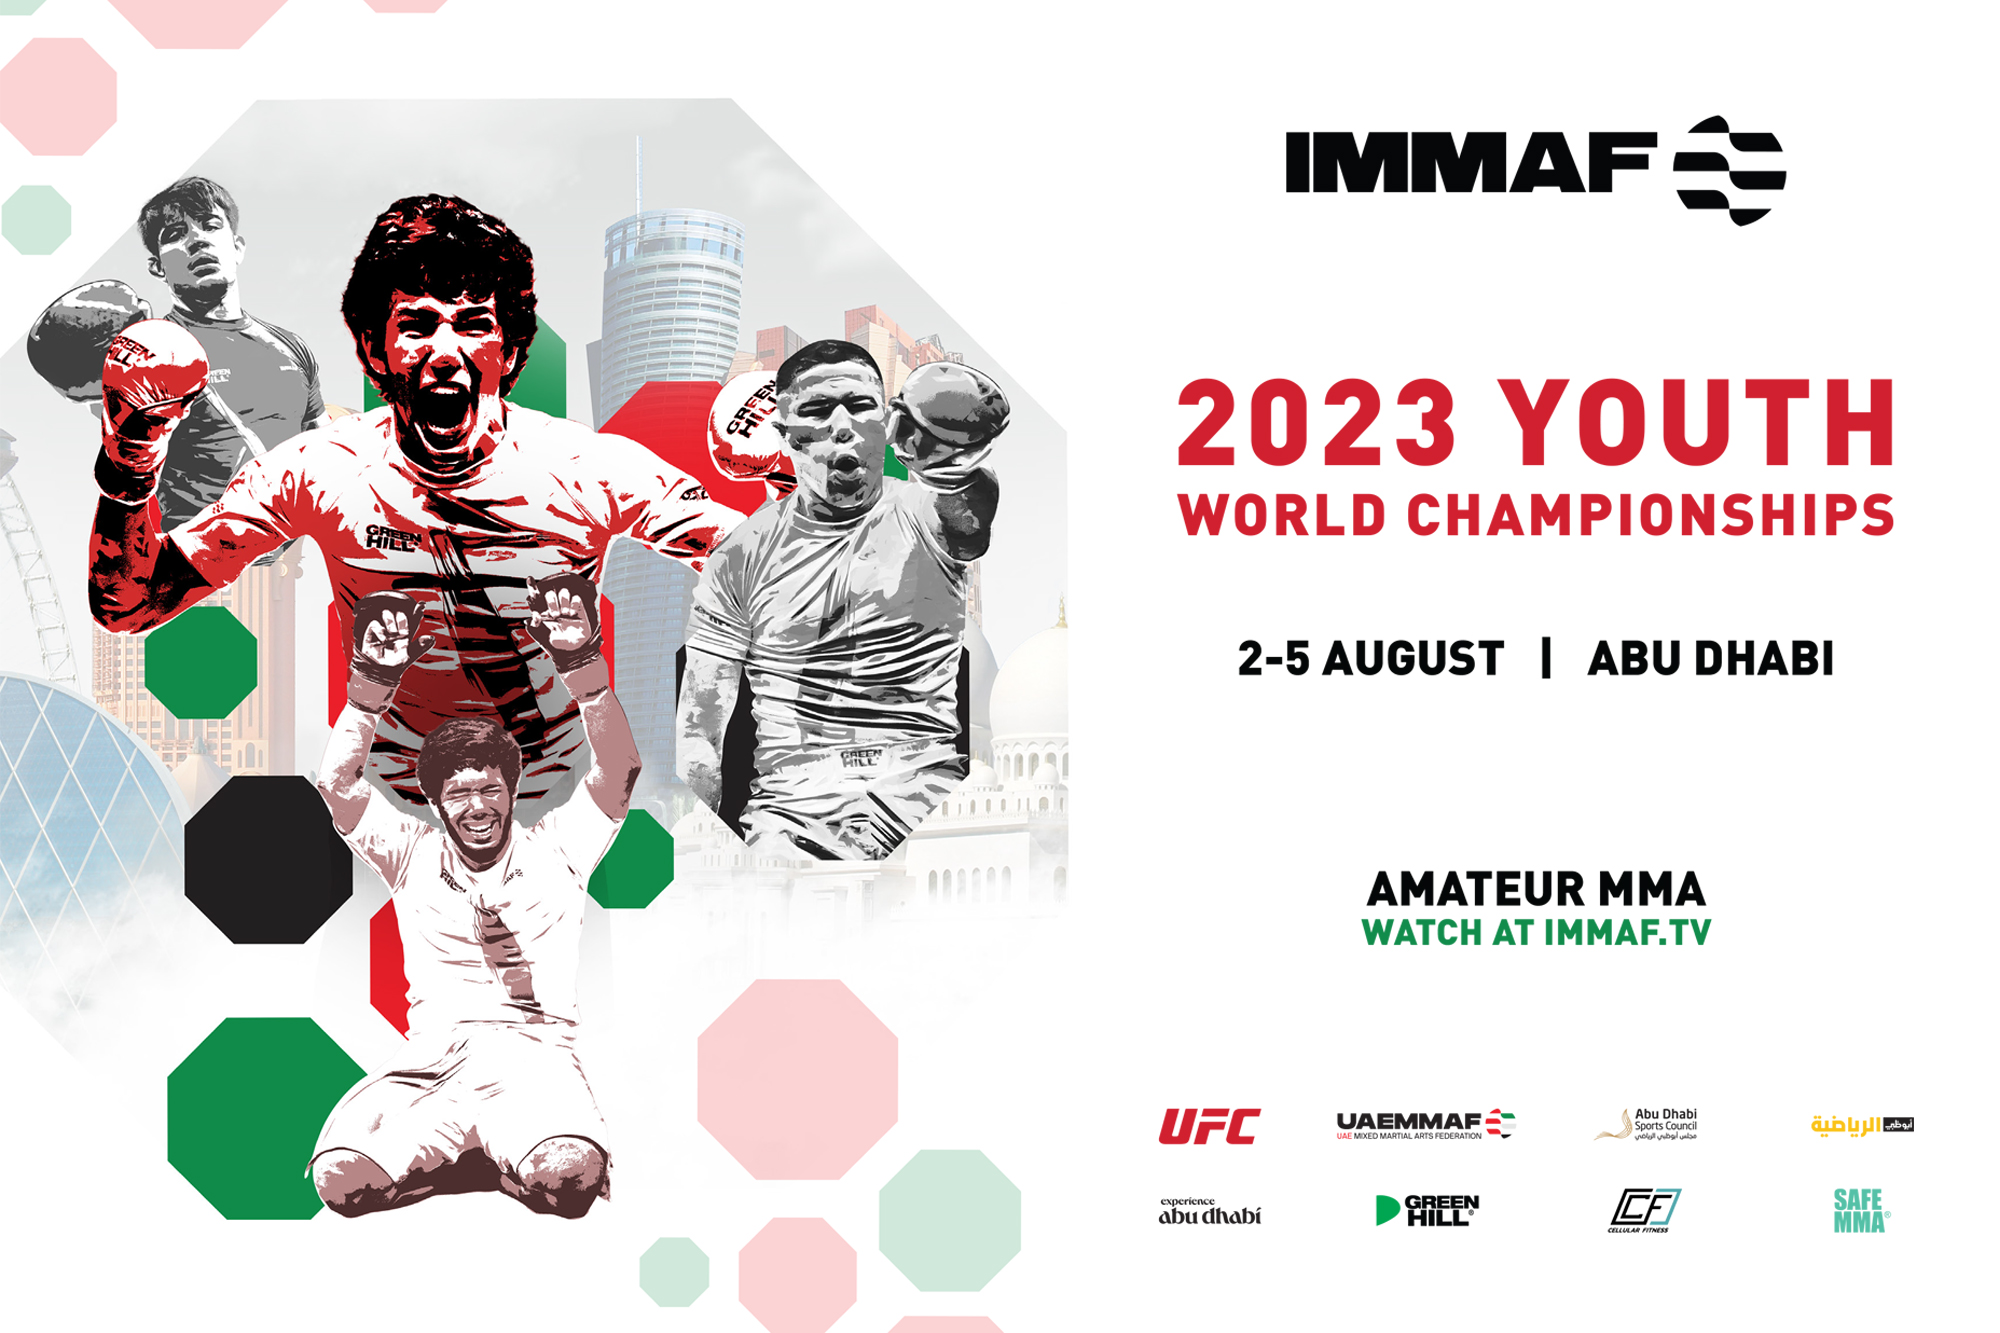 IMMAF Announces 2023 Youth MMA World Championships in Abu Dhabi